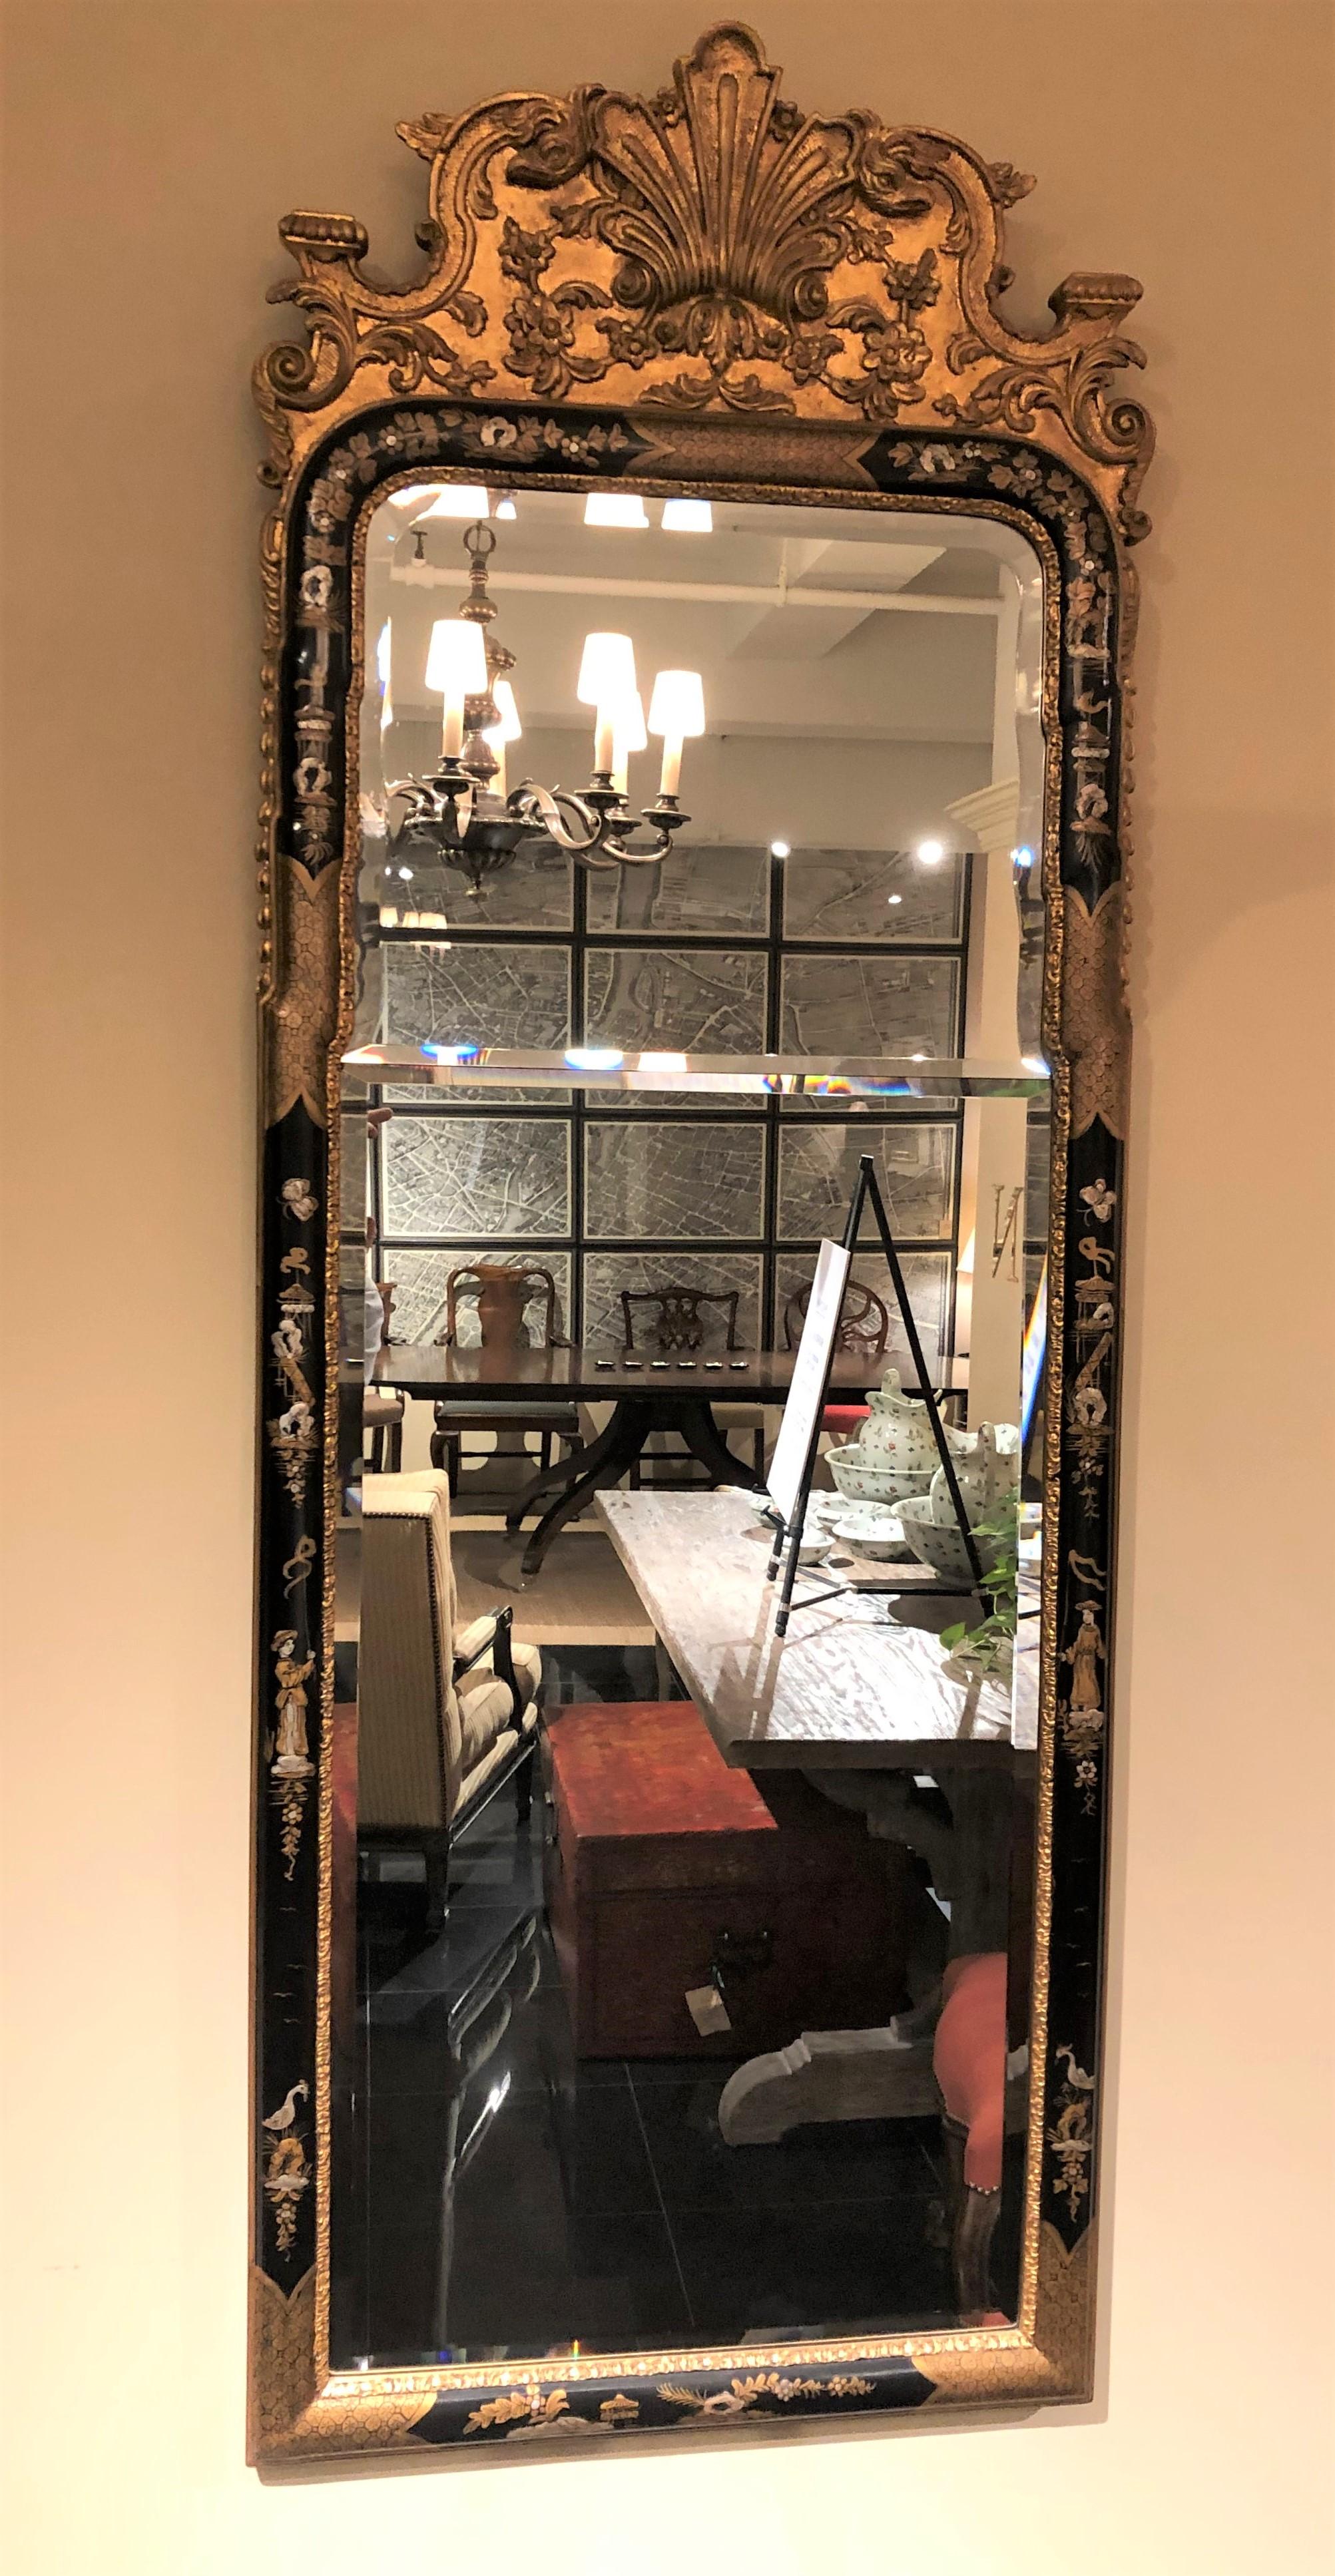 Very fine and decorative black lacquered and gold metal leaf Queen Anne style mirror with hand painted chinoiserie decoration and double bevel glass.